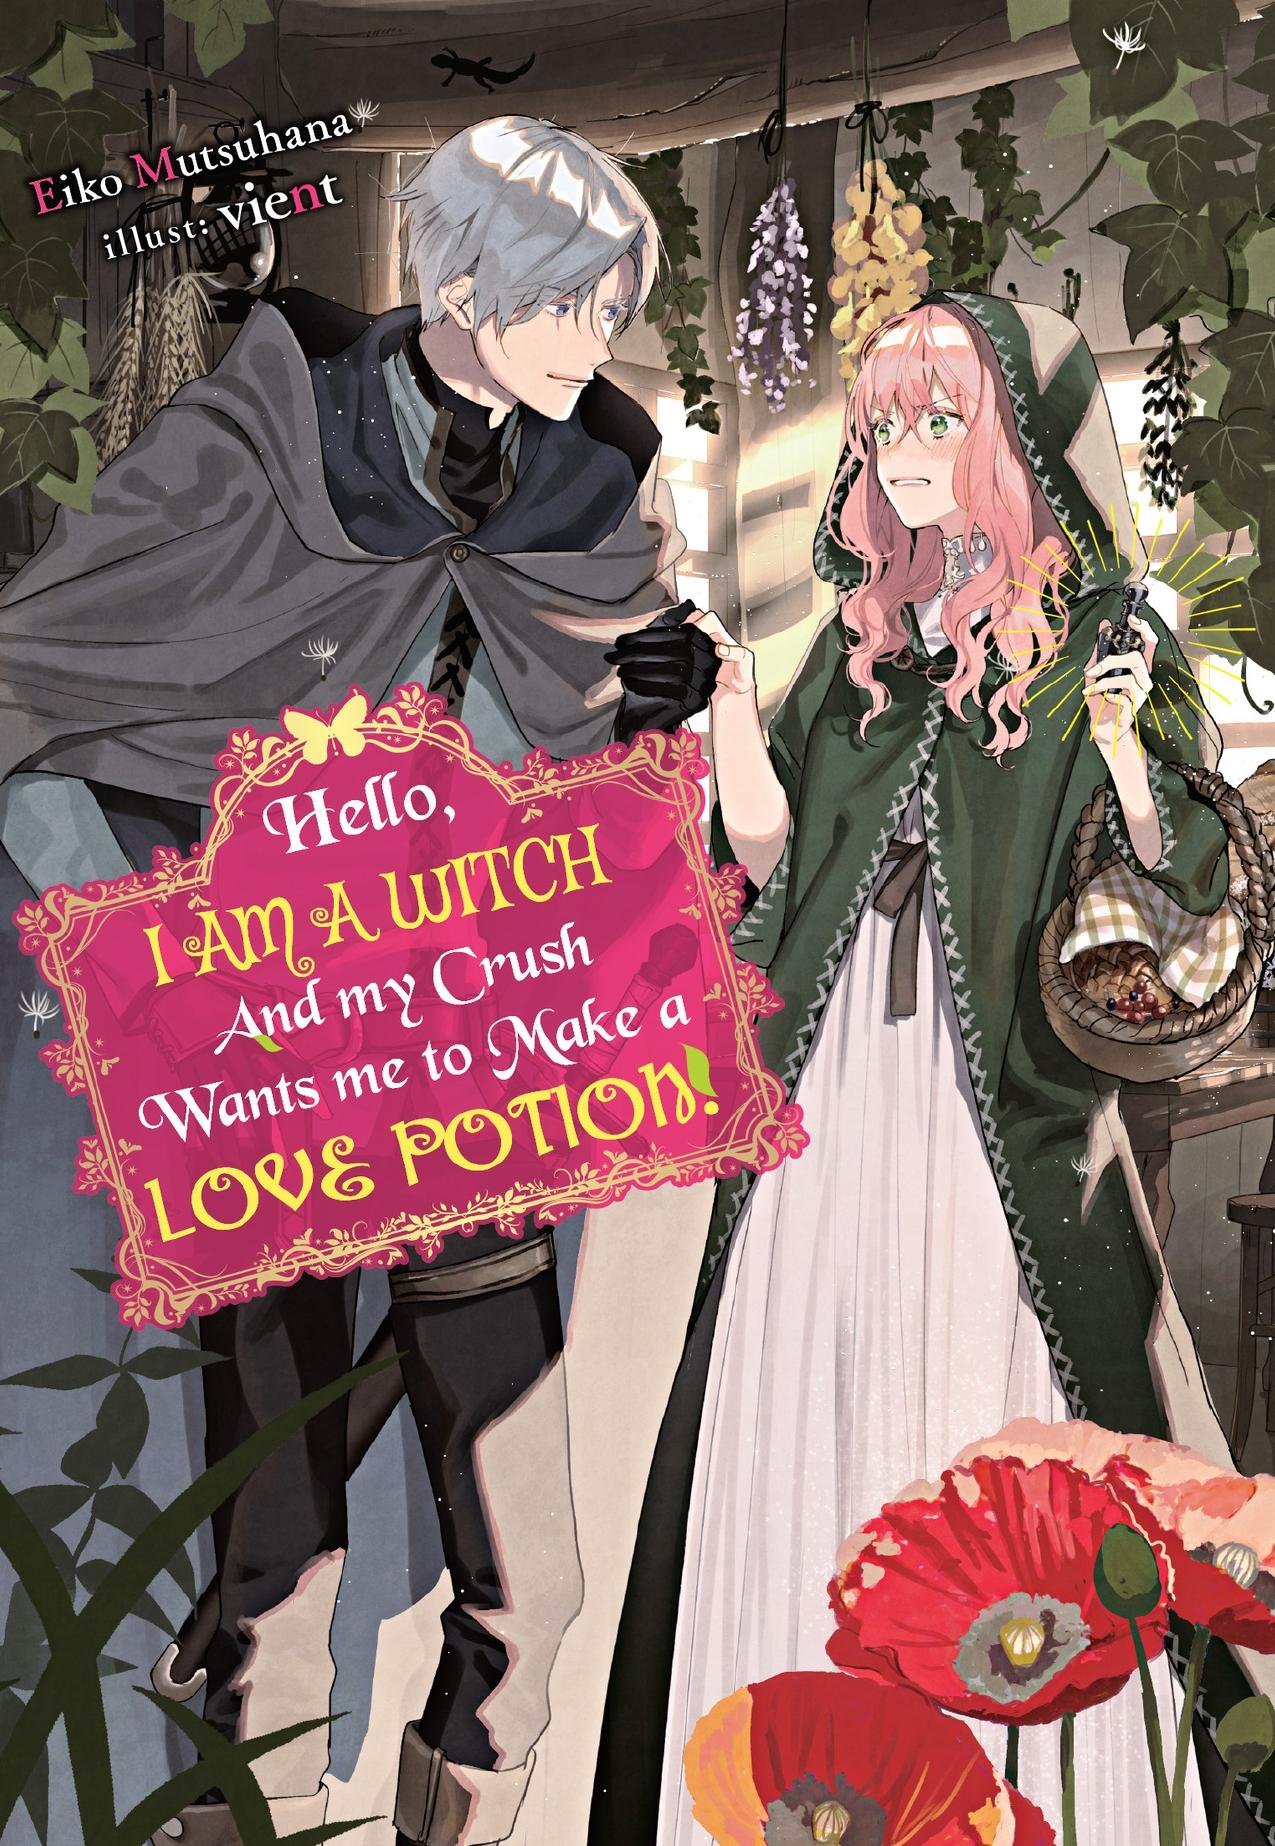 Hello, I am a Witch and my Crush Wants me to Make a Love Potion! by Eiko Mutsuhana